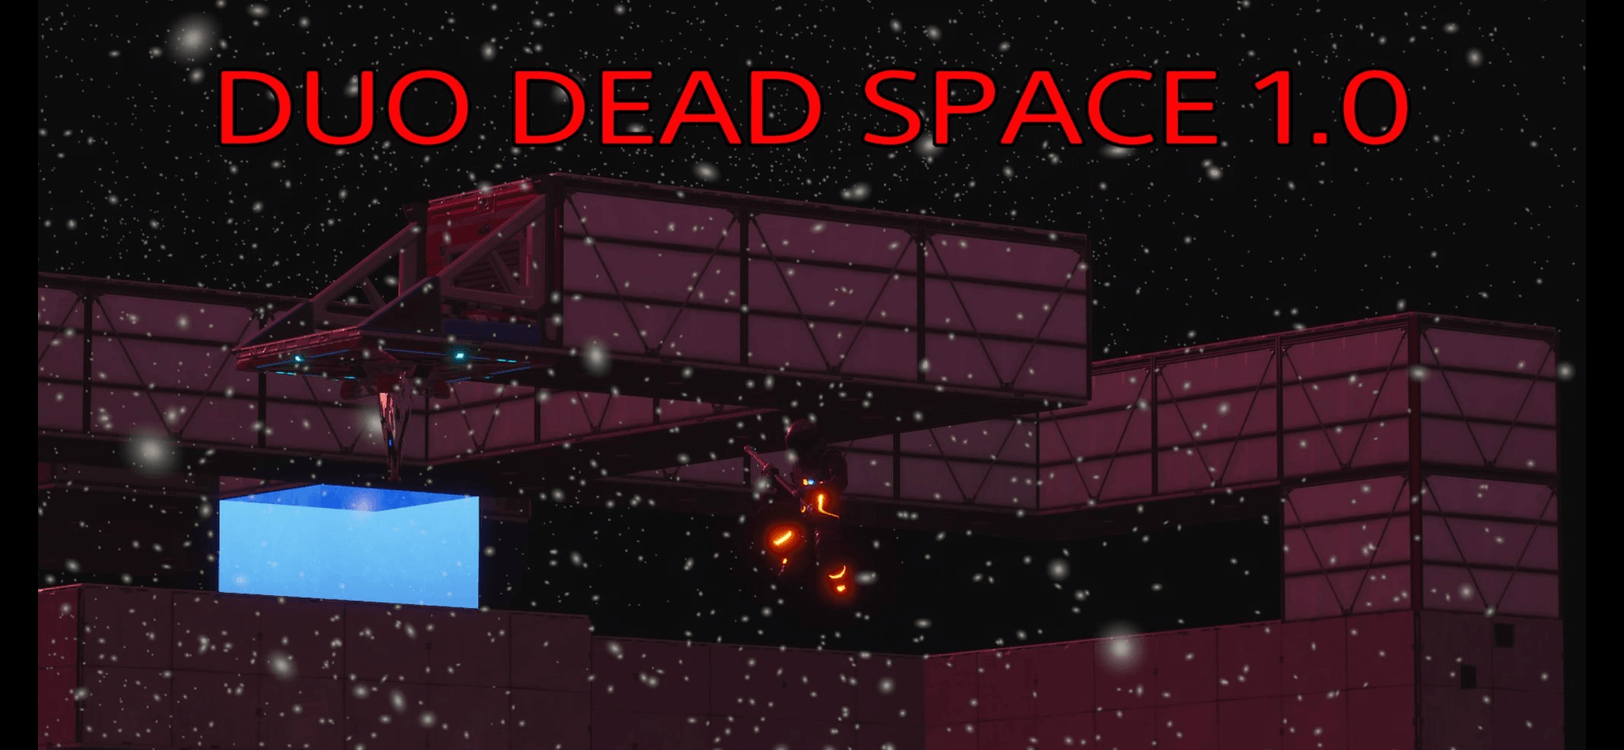 DUO DEAD SPACE 1.0